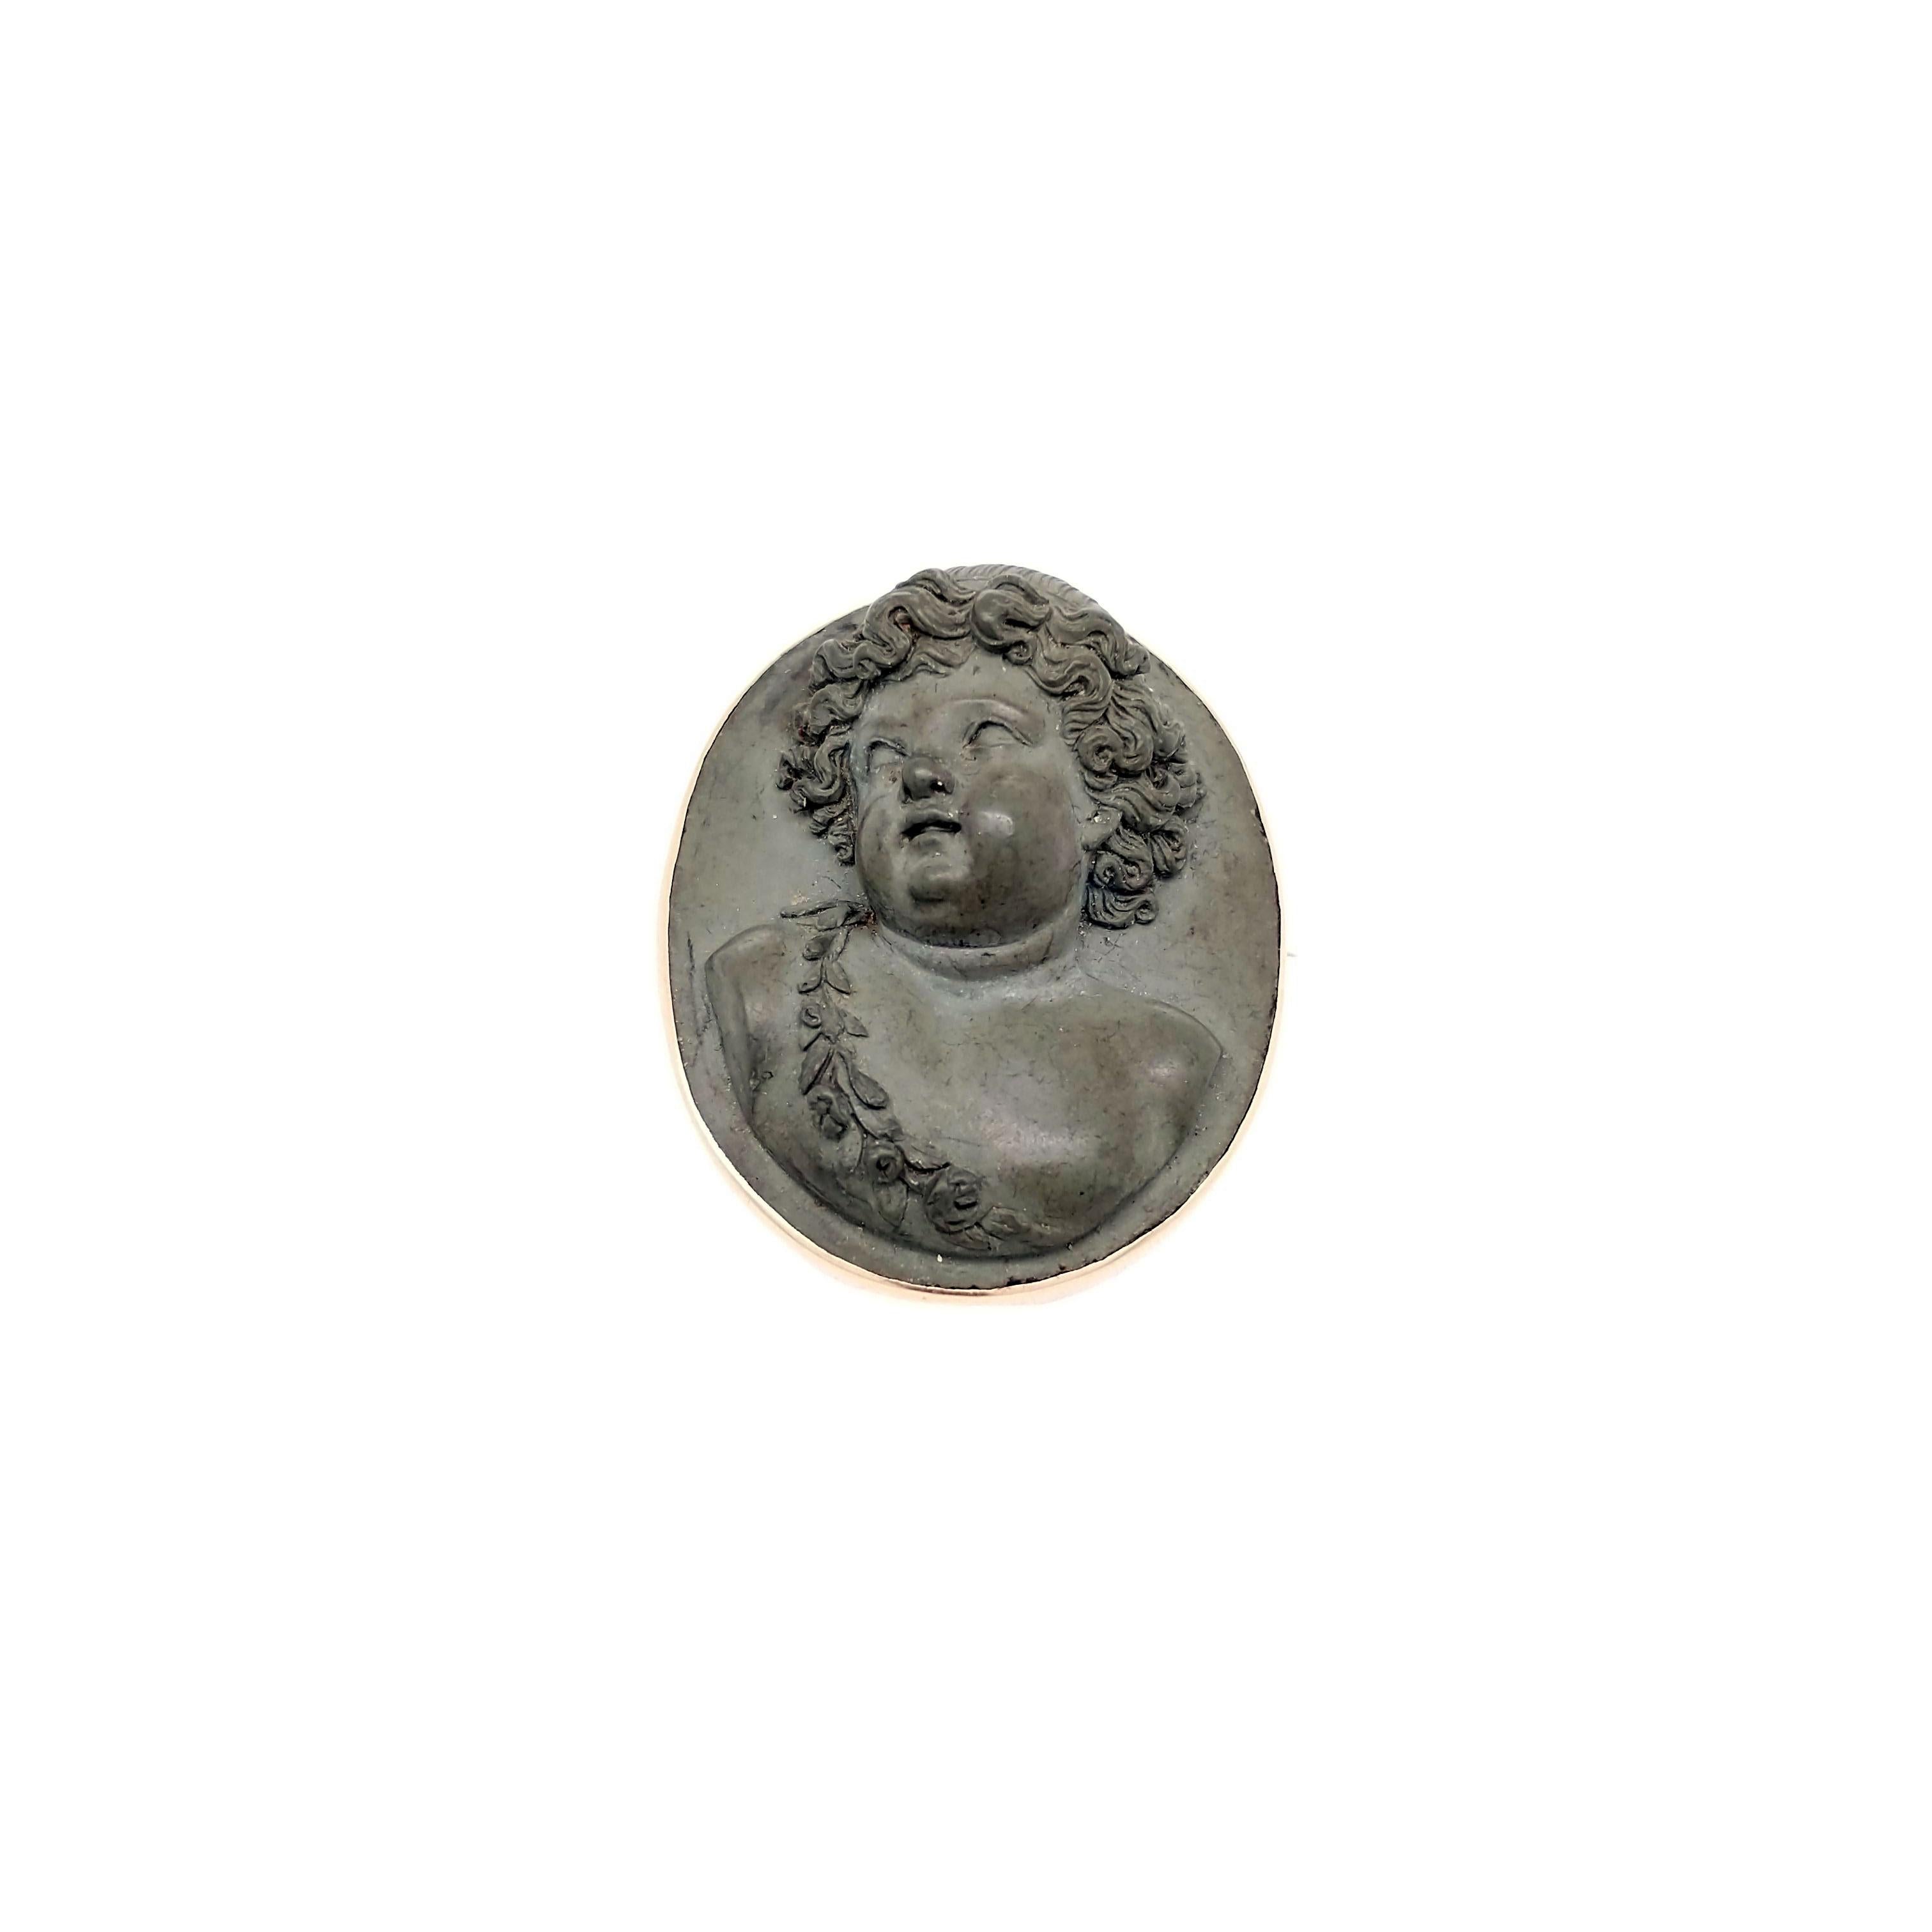 This cameo is magnificent! Made of hand-carved lava that is smooth to the touch, set in 14K yellow gold, this cameo pin will make the perfect addition to your collection! This cameo features an ornate carving of a young child with hair in curls and